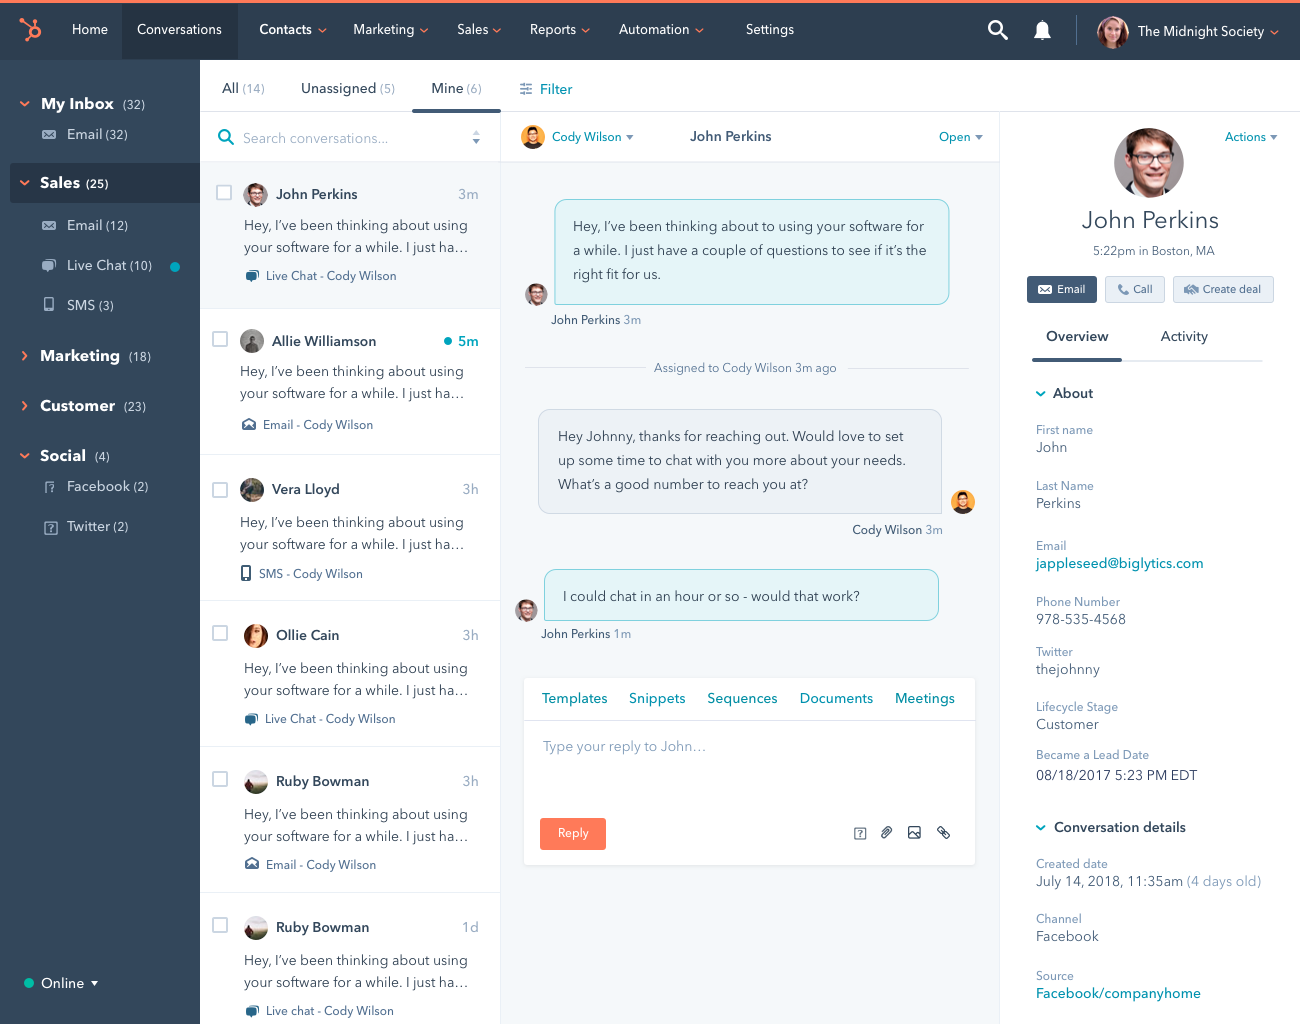 HubSpot Announces Free Conversations Tool for Multi-Channel, One-to-One Communication at Scale